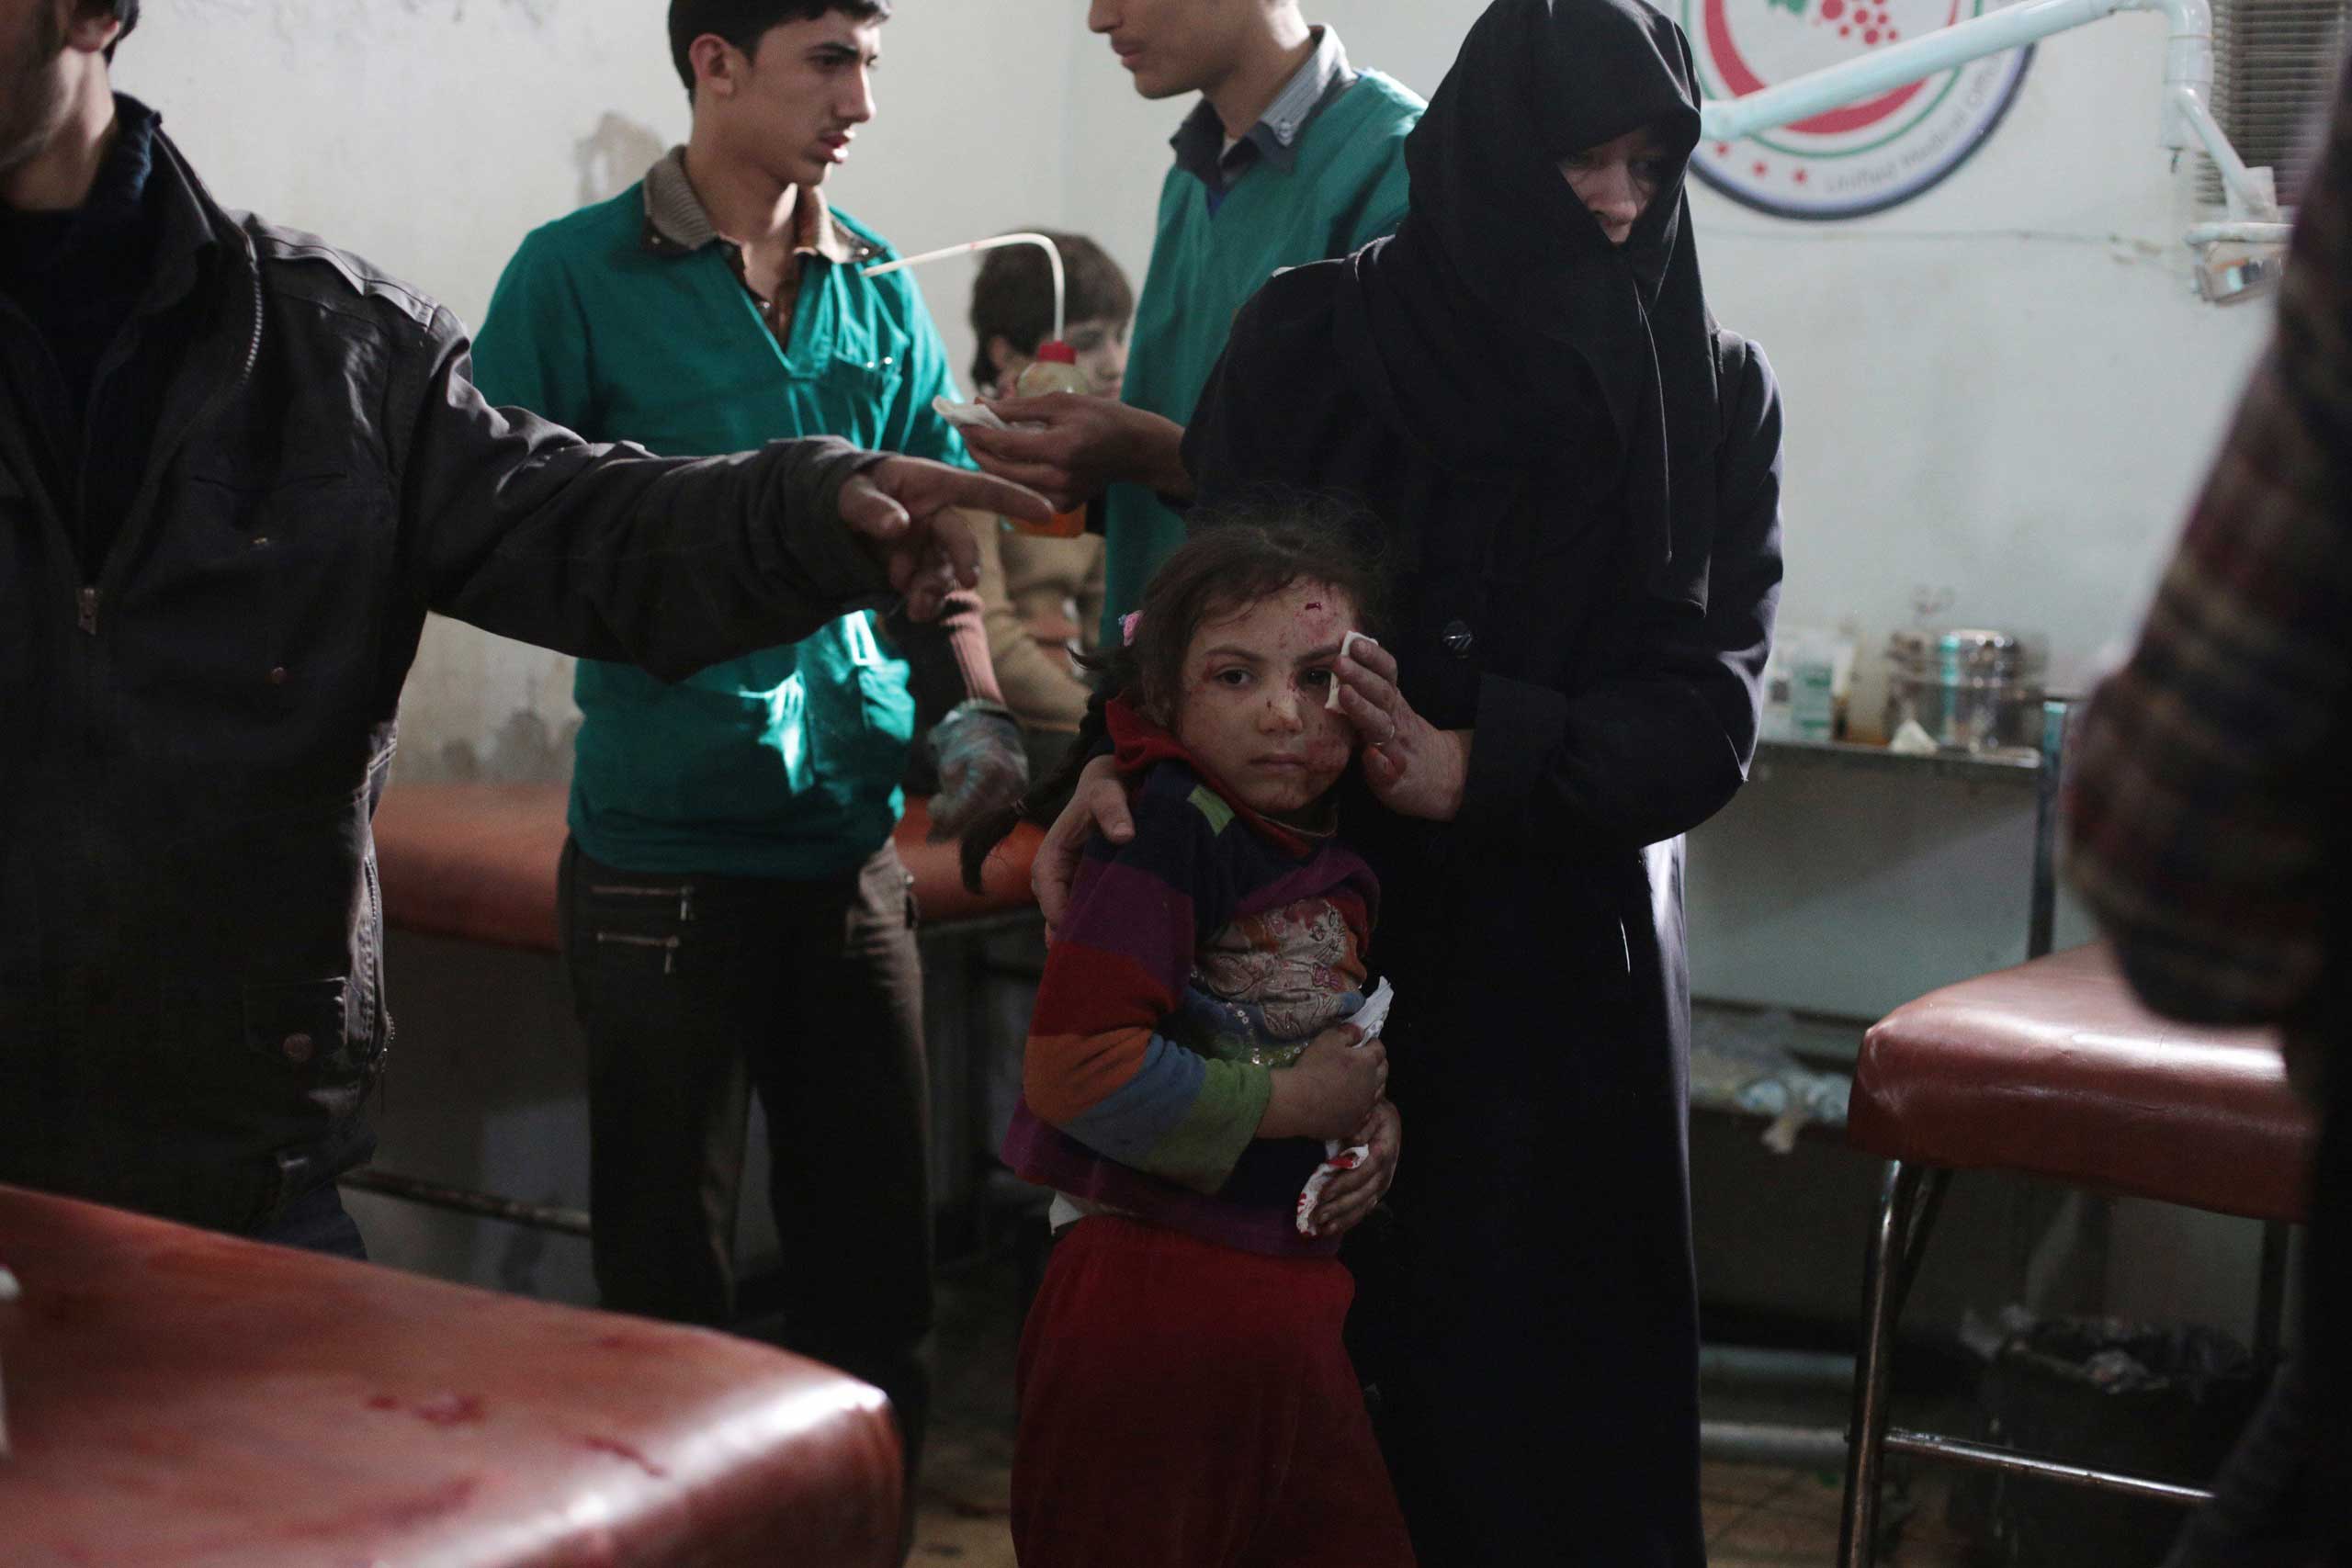 Nov. 11, 2014. A Syrian woman brings a wounded girl for treatment at a makeshift hospital in the rebel-held Damascus suburb of Douma, following a reported air strike by government forces on the town, 8 miles northeast of the Syrian capital.